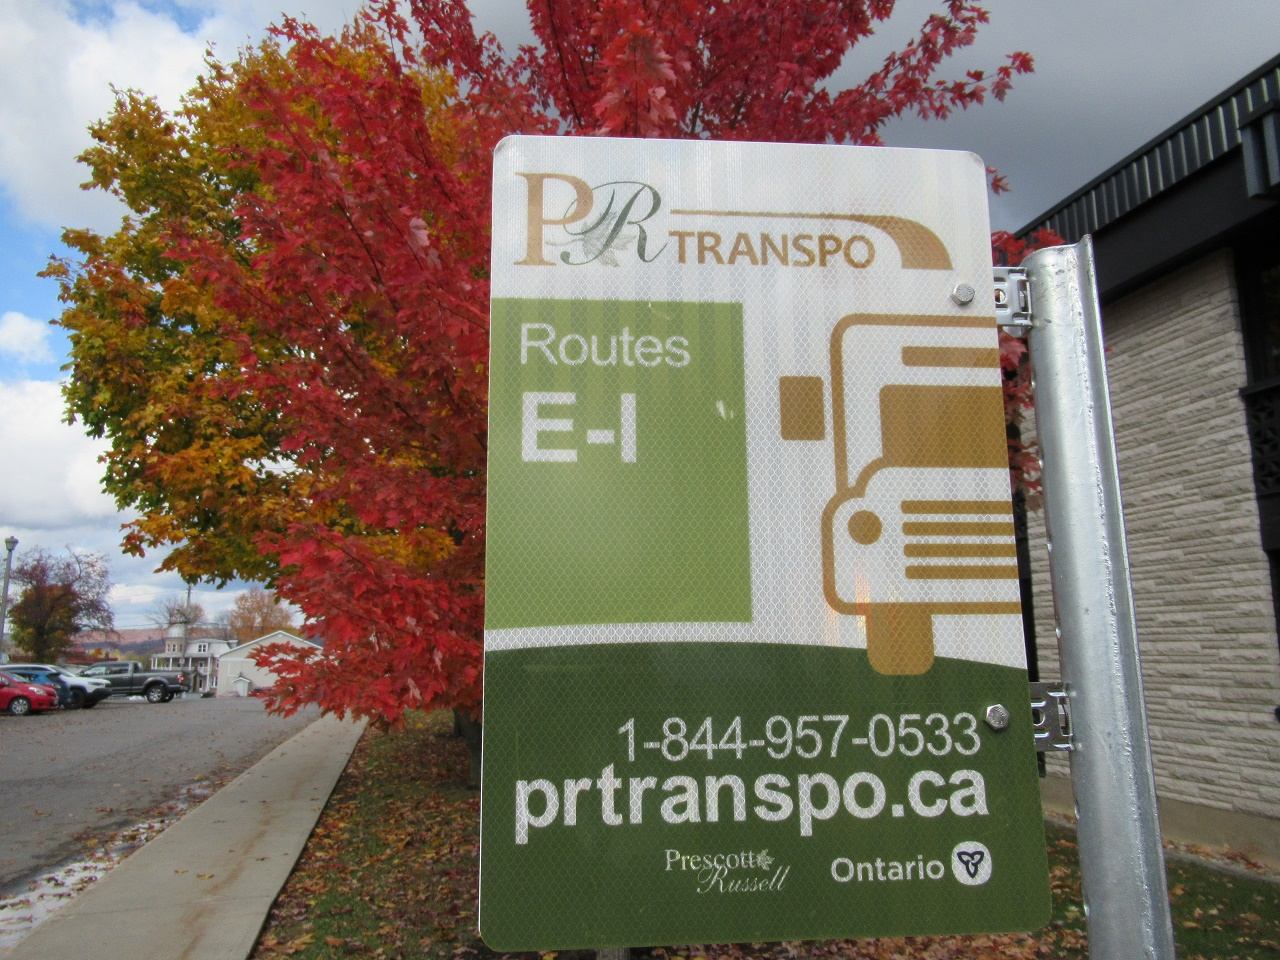 PR-Transpo returning to the roads amid questions over its future